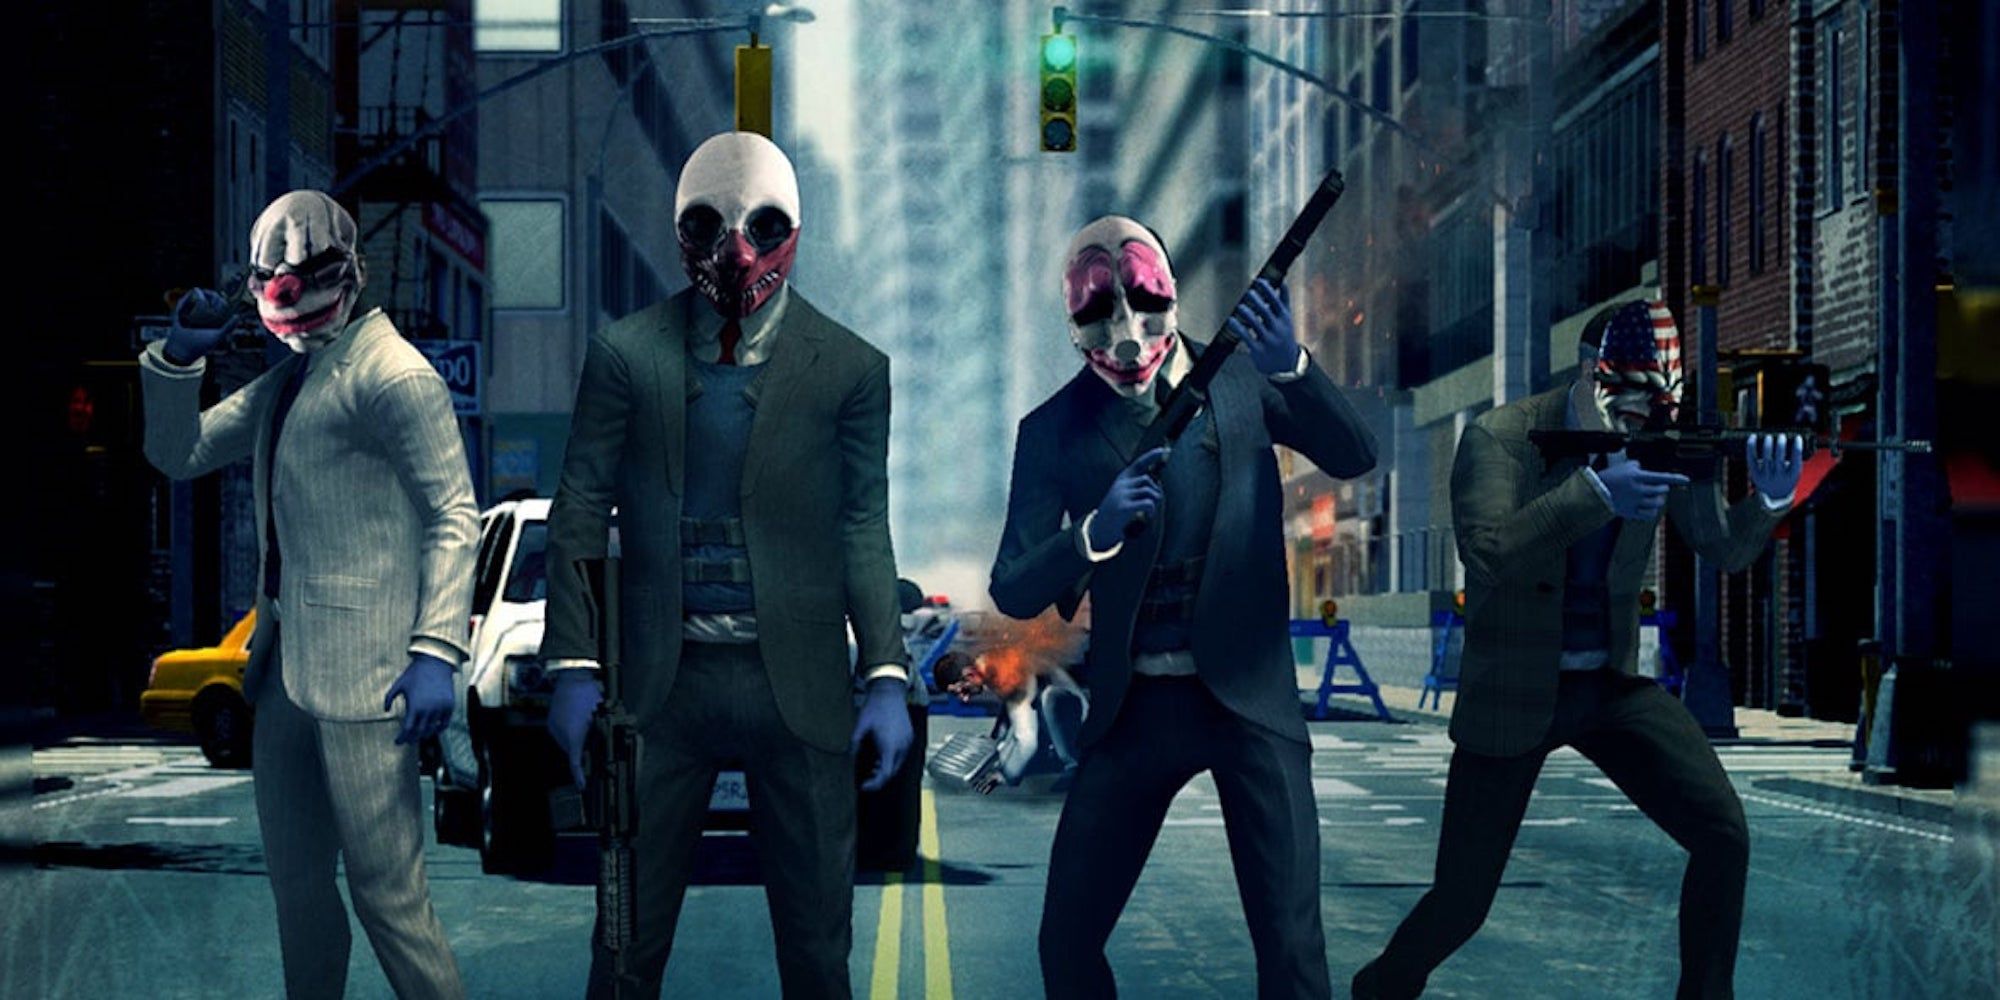 Characters lining the street in suits and masks (Payday 2)